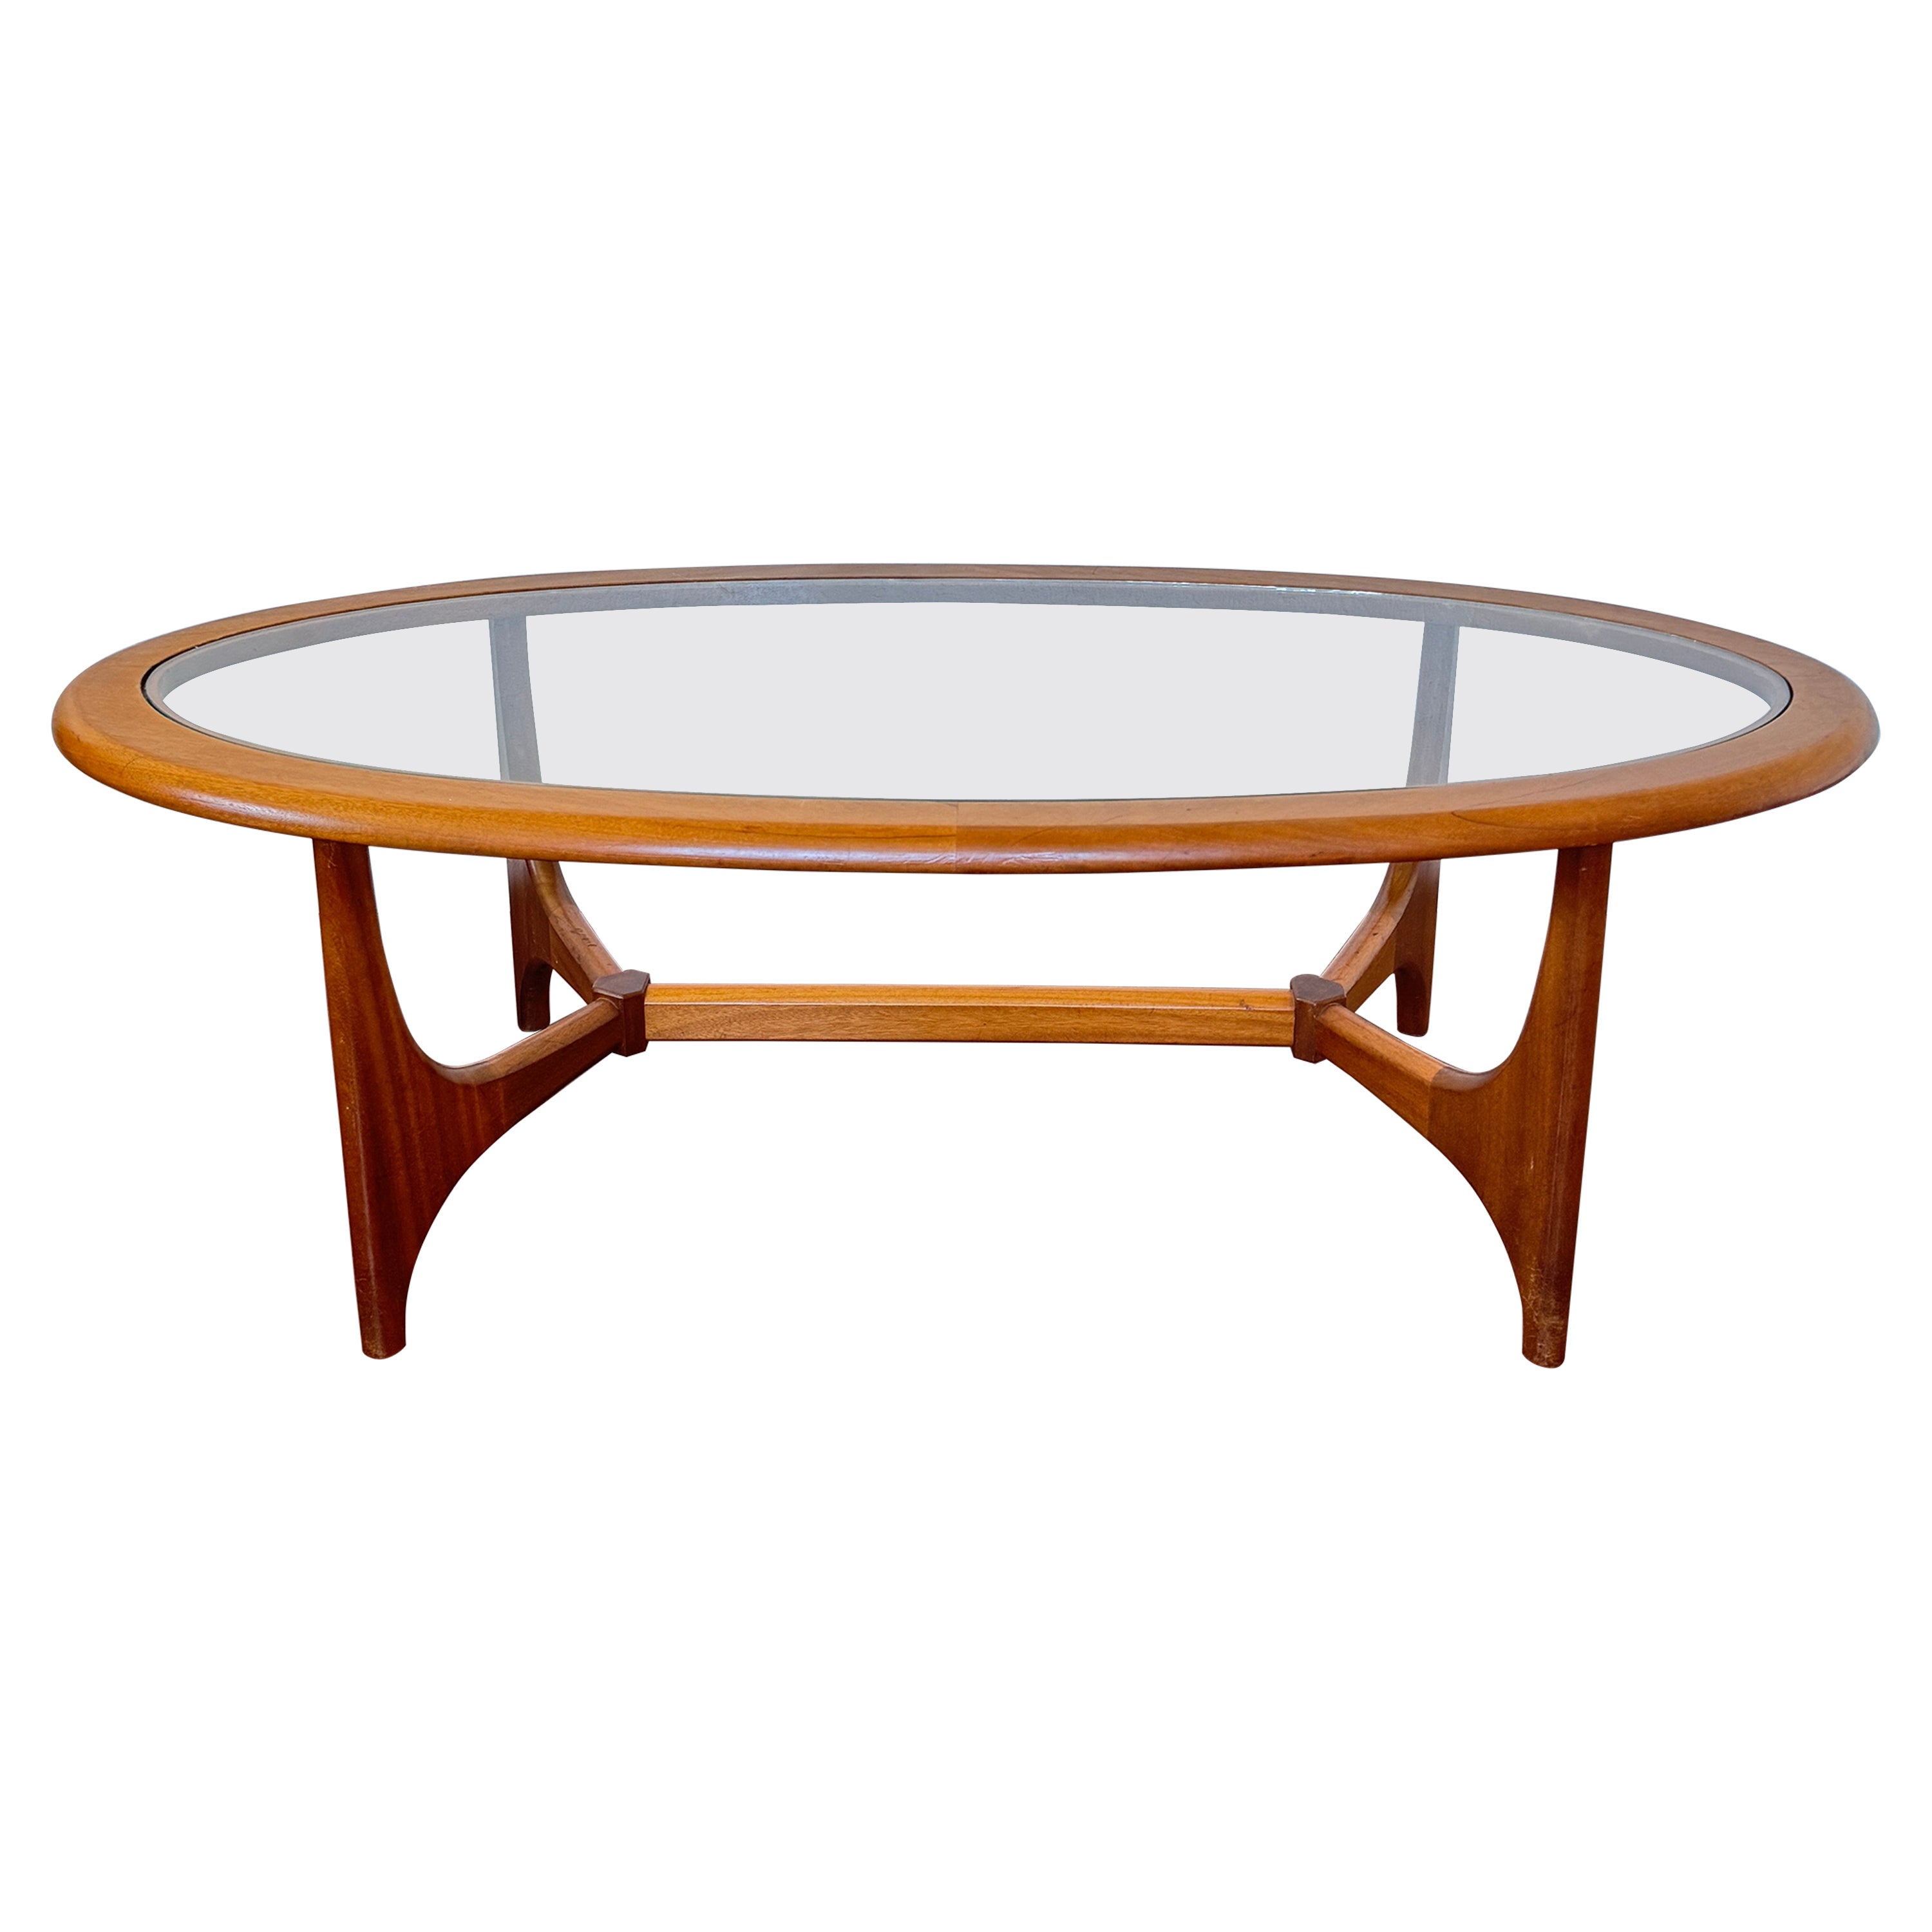 Mid century modern coffee table with a glass top by Stonehill, circa 1960s